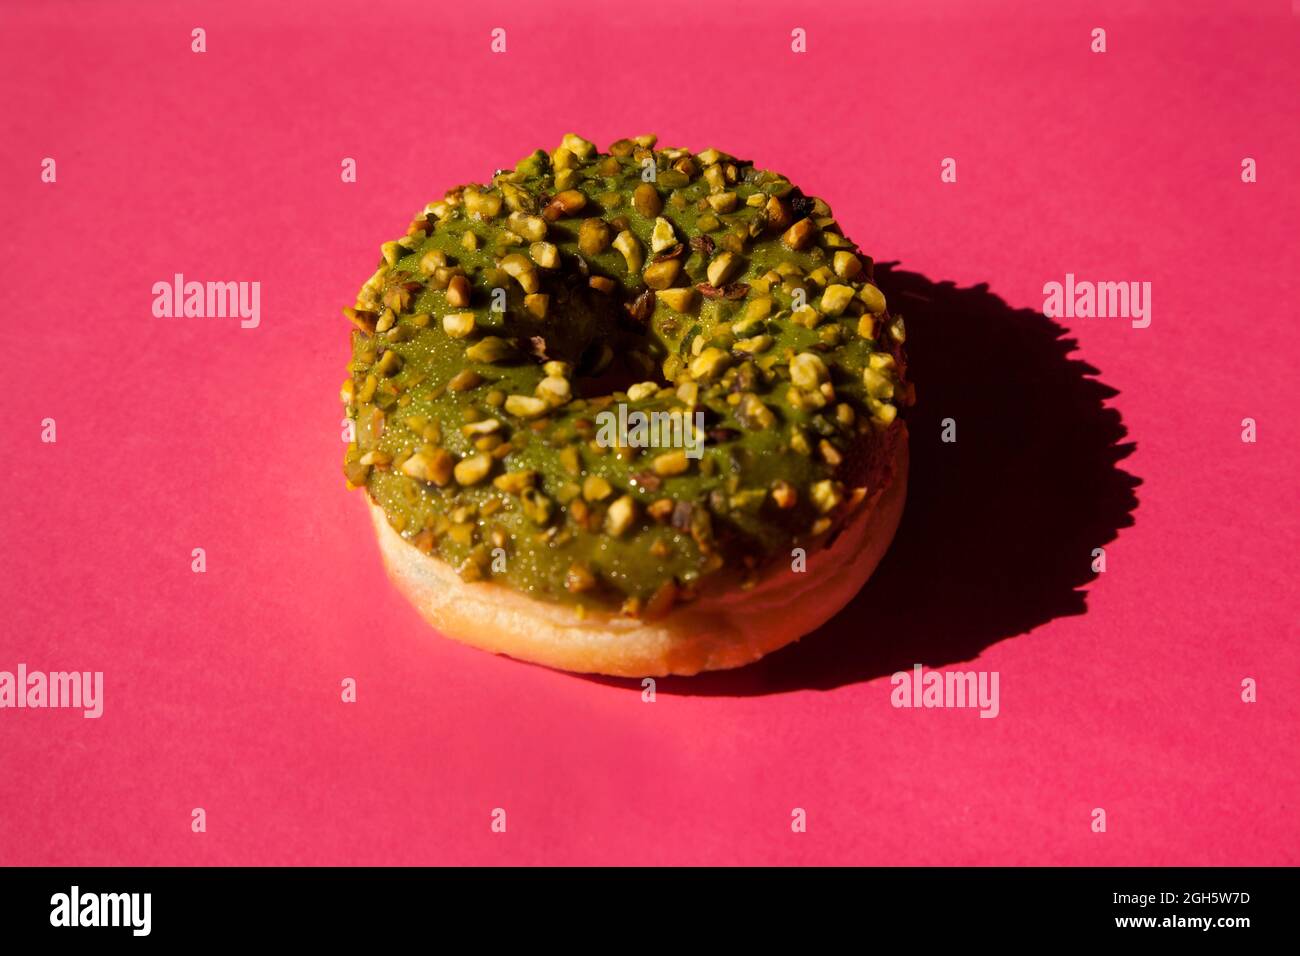 Top view of one donuts coated with a green sugar with nuts on pink background Stock Photo